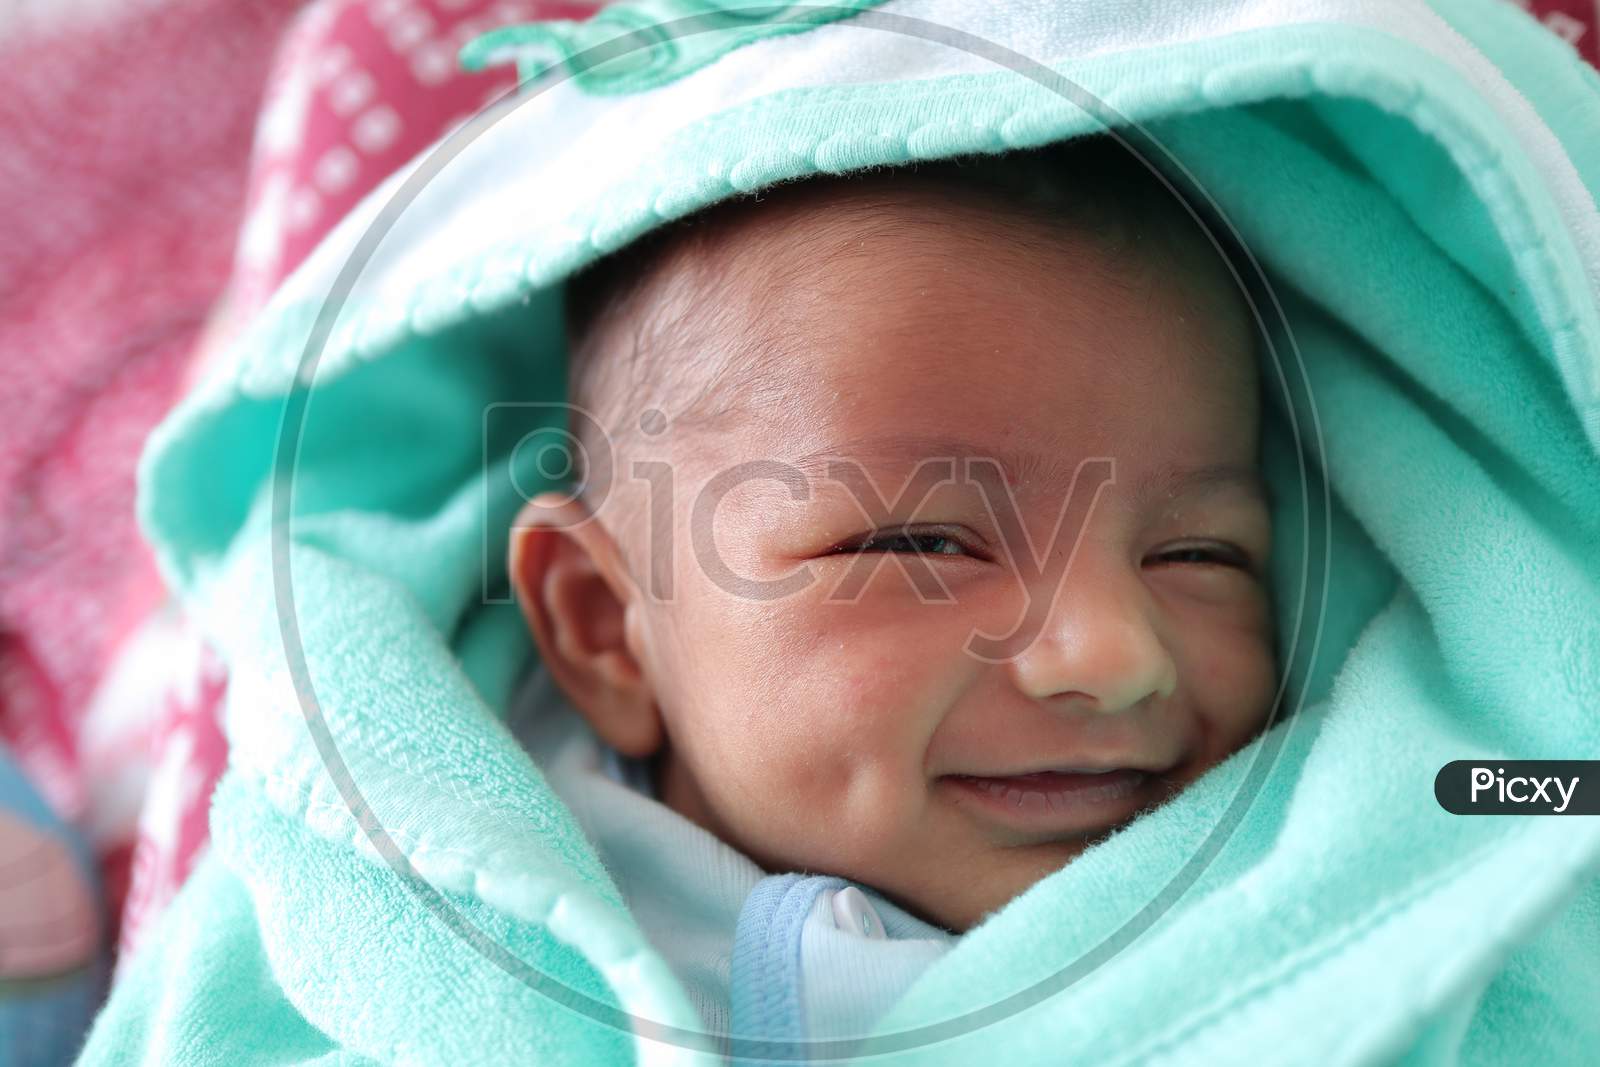 A Smiling Newborn Baby With Dimple In Cheek Wrapped In Sea Green Colored Towel With Hood With Eyes Closed With Selective Focus On Front Eye.